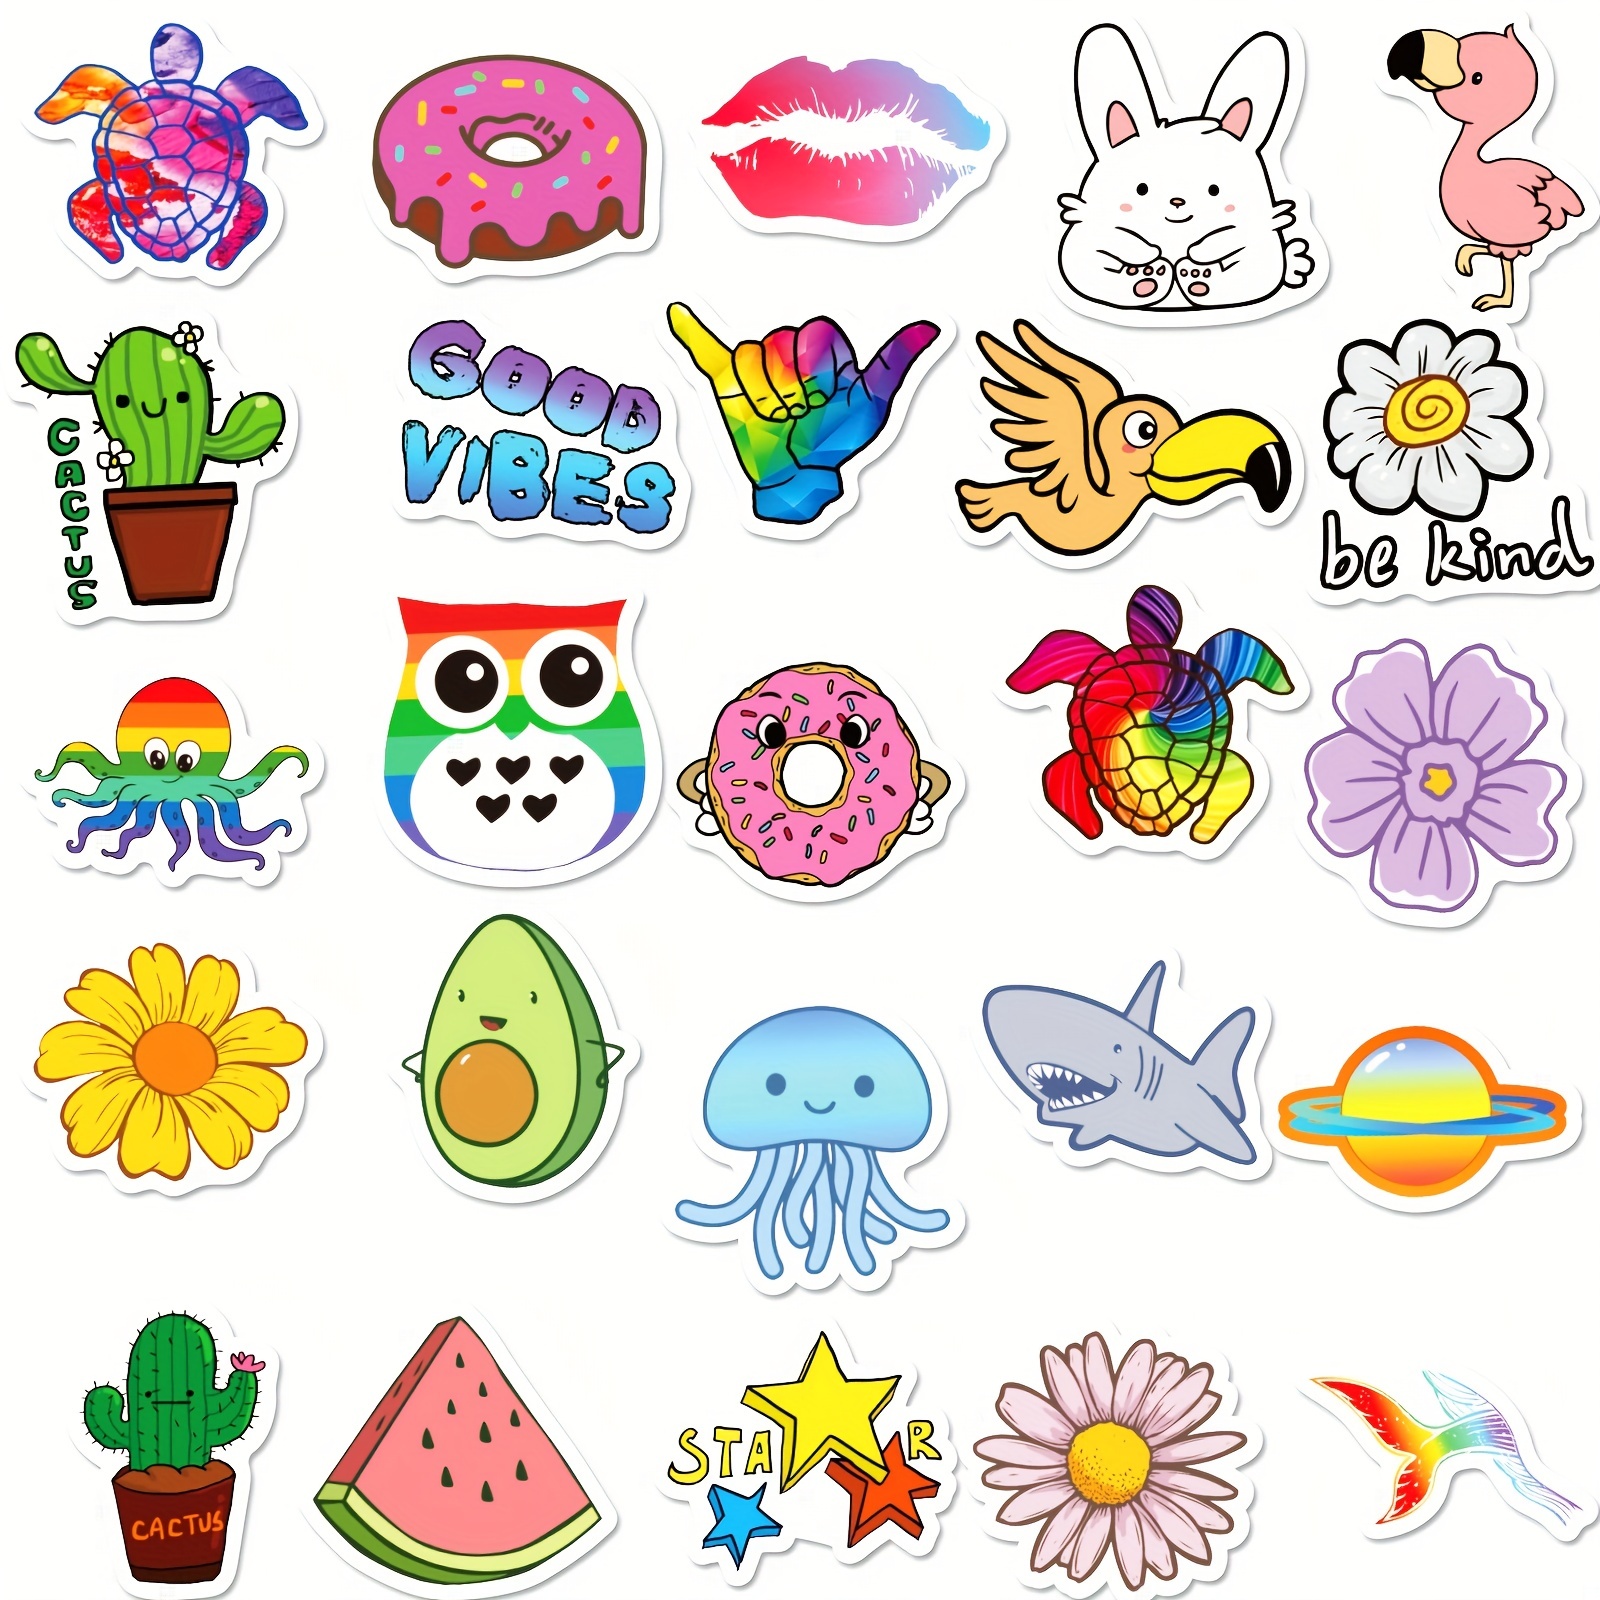 300 Pcs Stickers Pack, Colorful VSCO Vinyl Funny Stickers, Cute Waterproof  Aesthetic Stickers for Laptop Water Bottle Phone, Cool Stickers for Kids